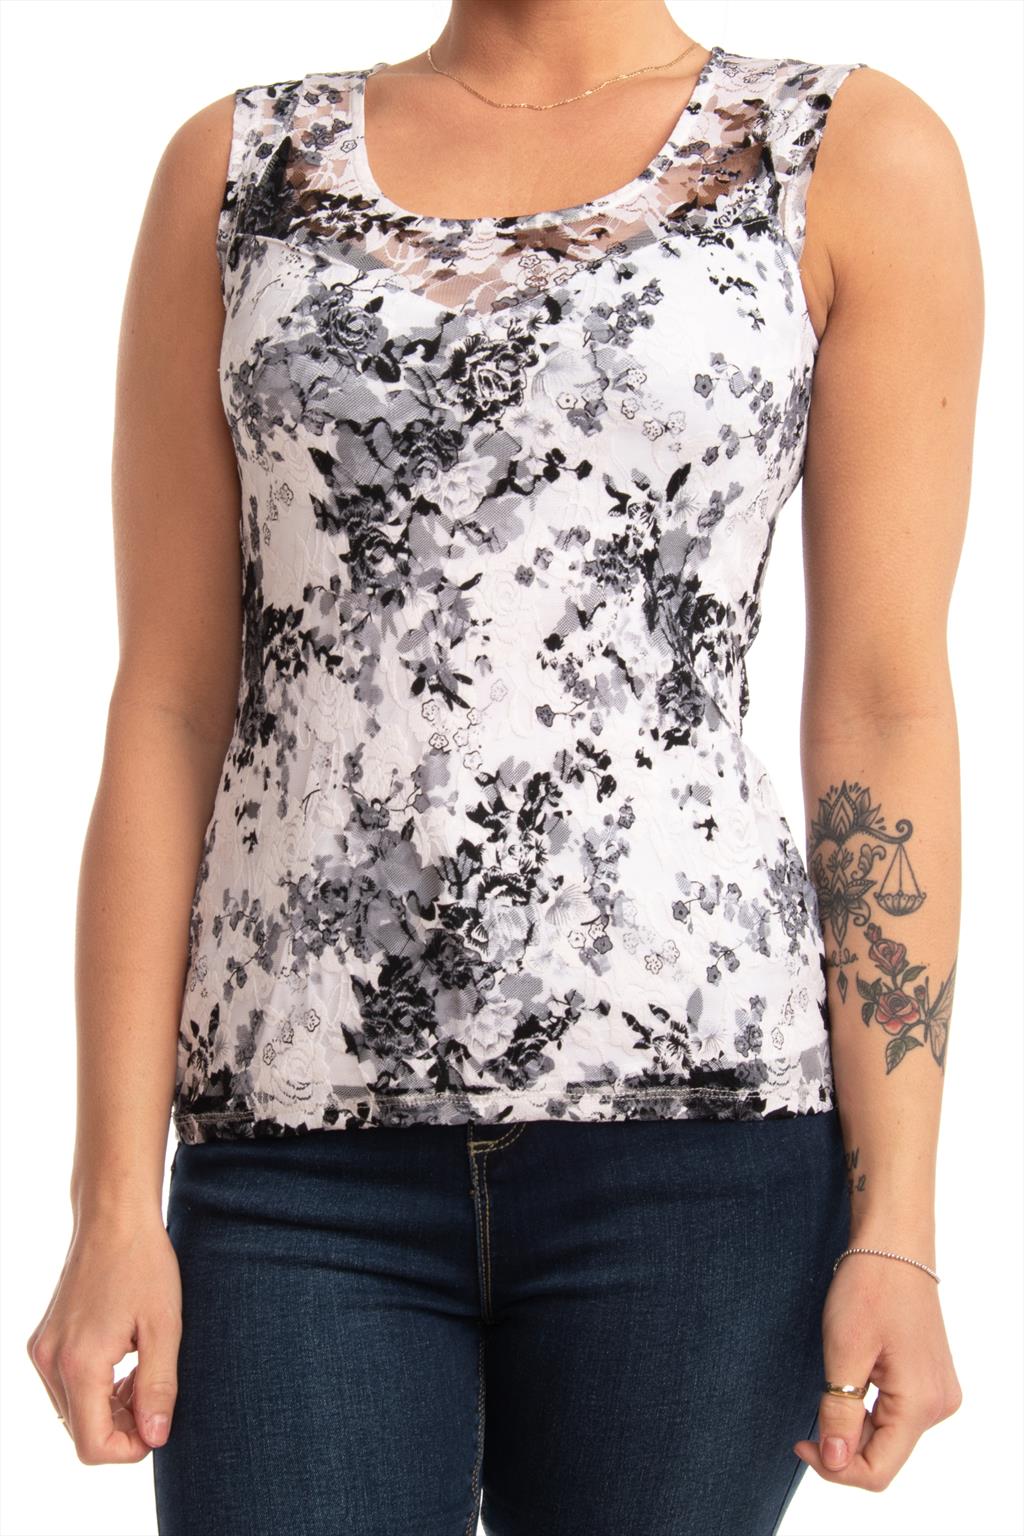 Lace floral sleeveless top